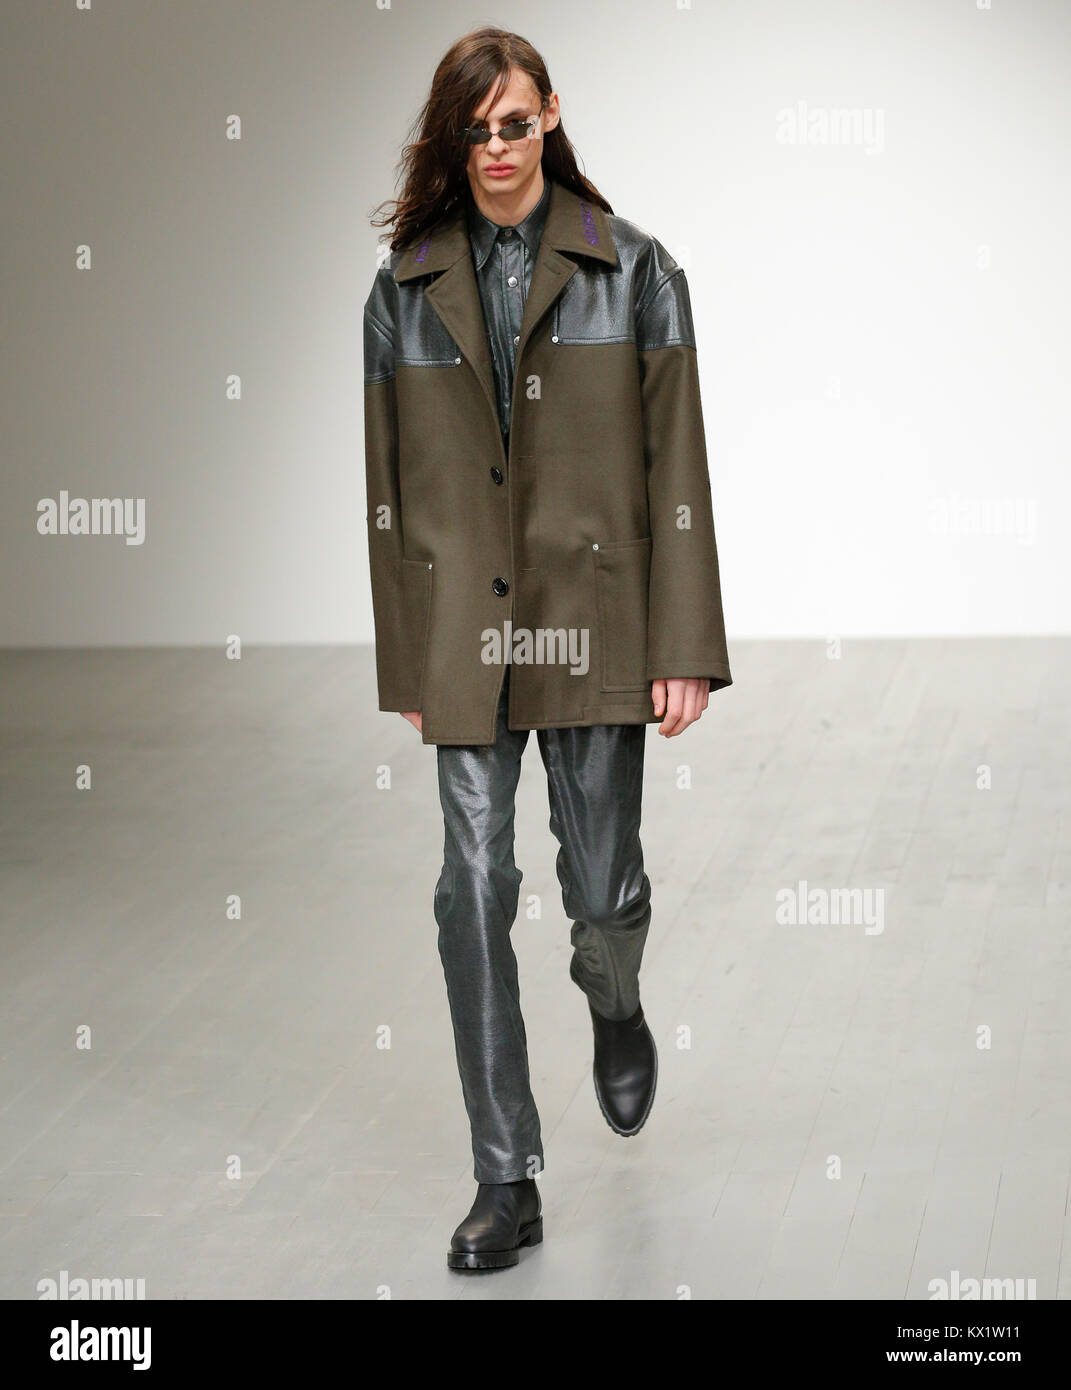 London, UK. 06th Jan, 2018. 6th of January 2018 John Lawrence Sullivan catwalk at London Fashion Week Men's AW18. British Fashion Council Show Space at Strand 180 presenting designers collections for aw18, fw18. Credit: catwalking/runways/Alamy Live News Stock Photo